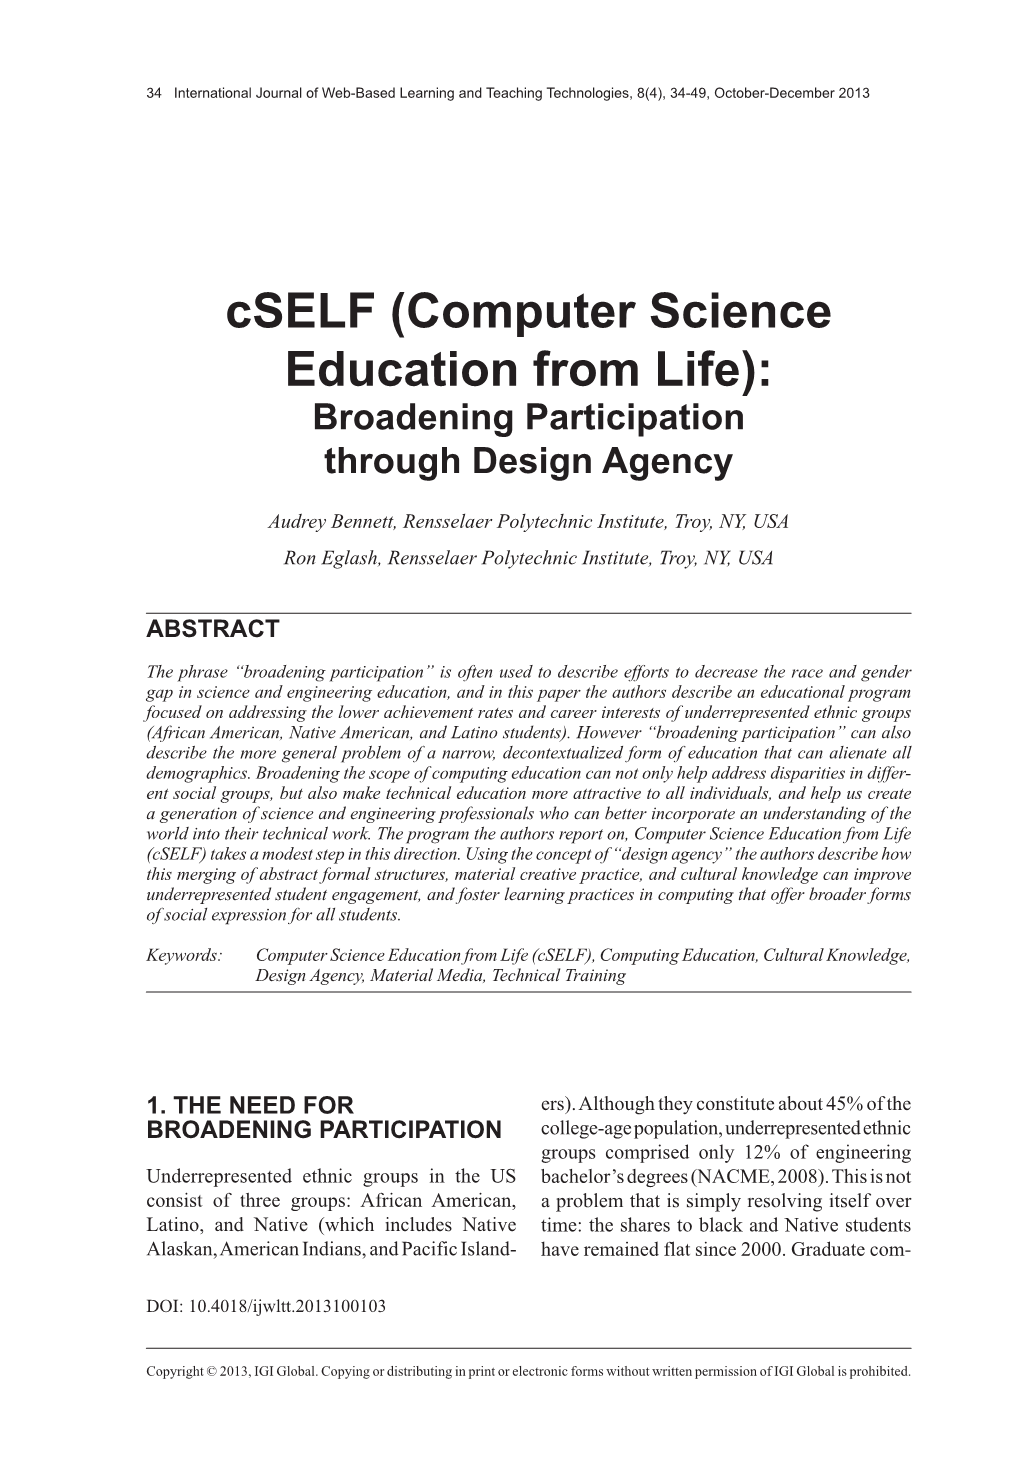 Cself (Computer Science Education from Life): Broadening Participation Through Design Agency